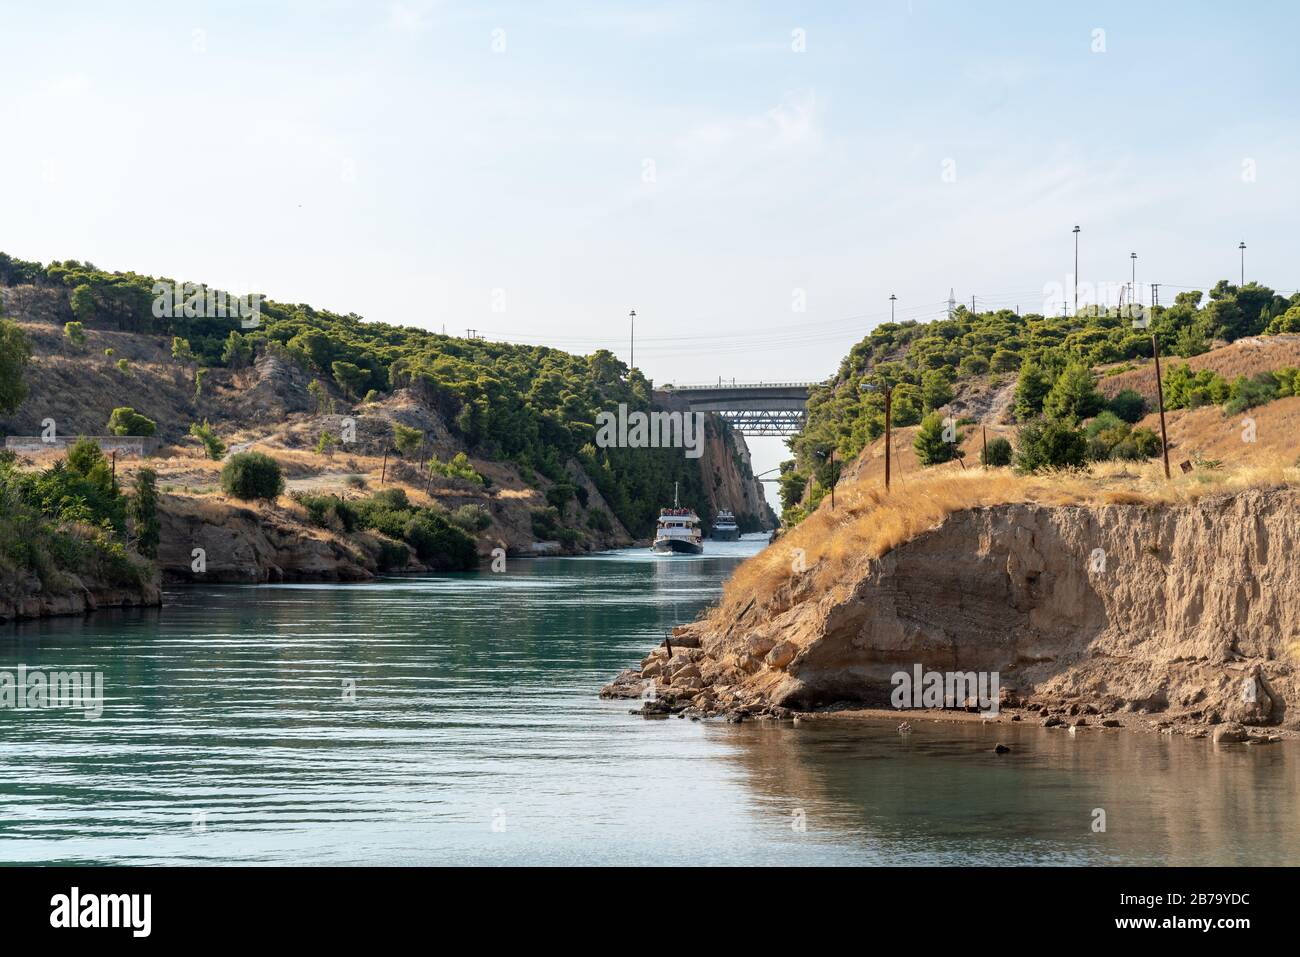 Corinth canal, vessels passings Stock Photo